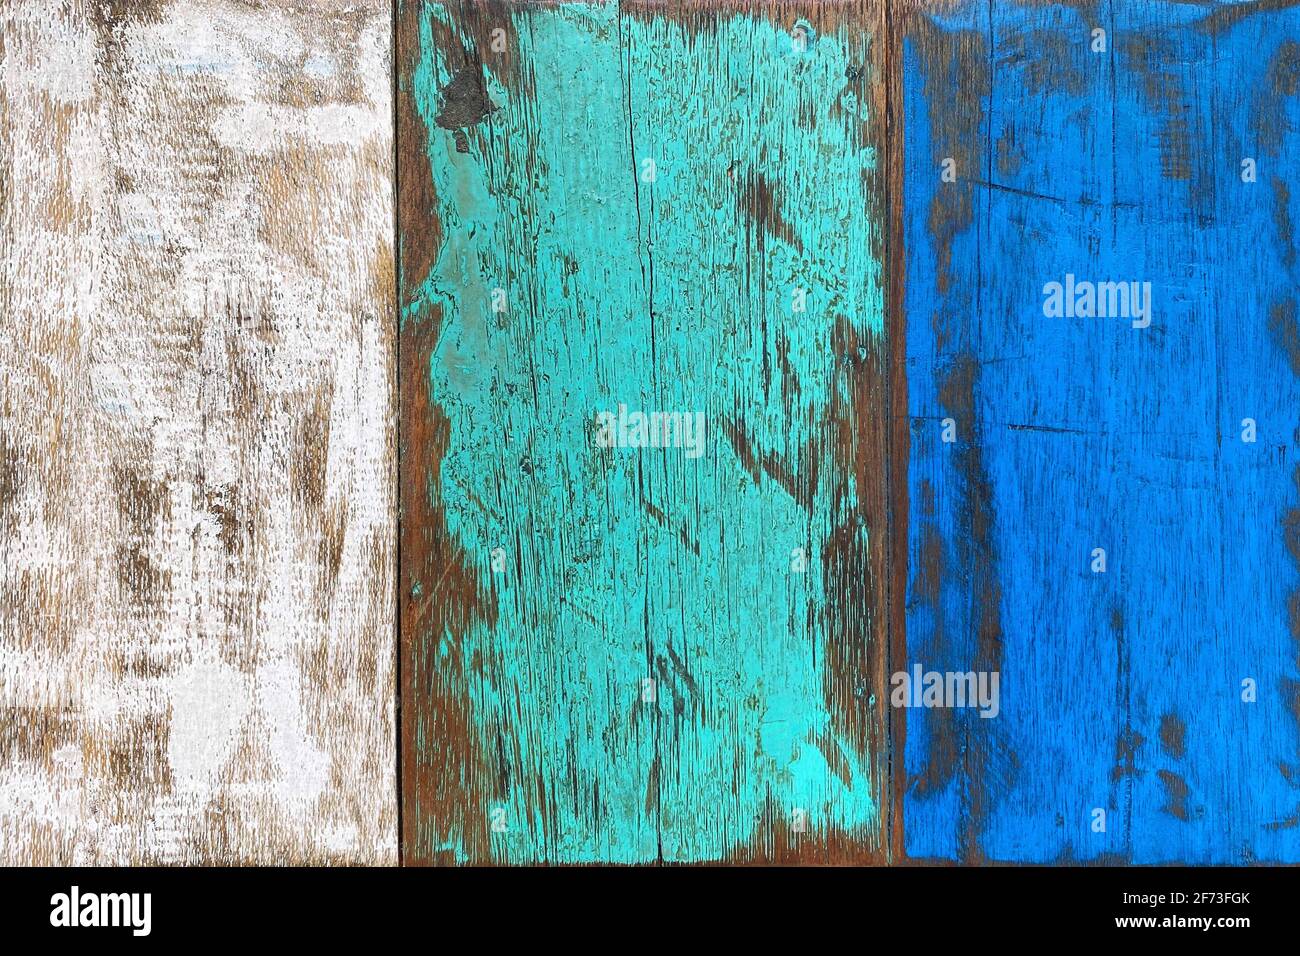 Wooden background. Vintage style rustic wood texture Stock Photo